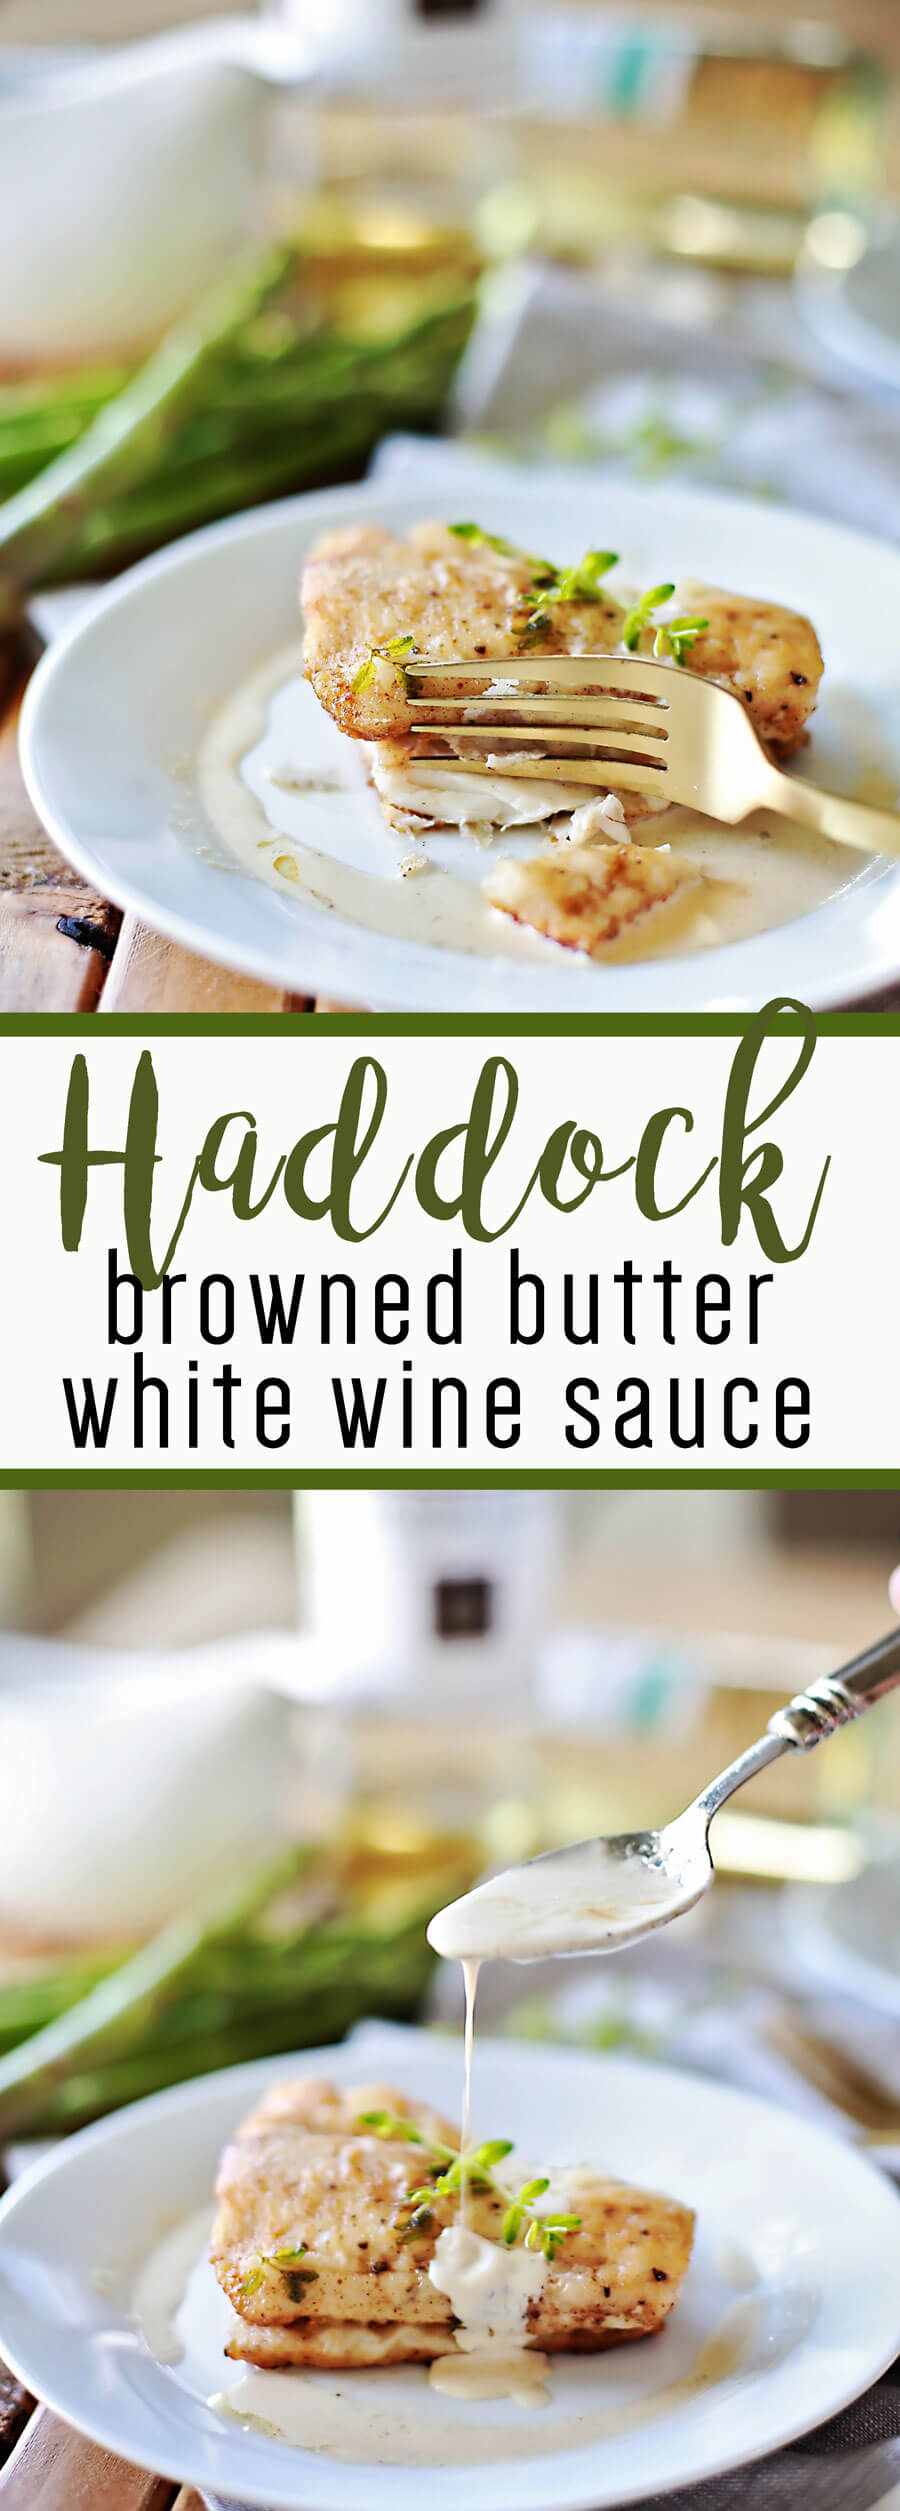 Baked haddock recipes with Browned Butter White Wine Sauce:Flaky haddock pan fried, and served with a browned butter white wine sauce